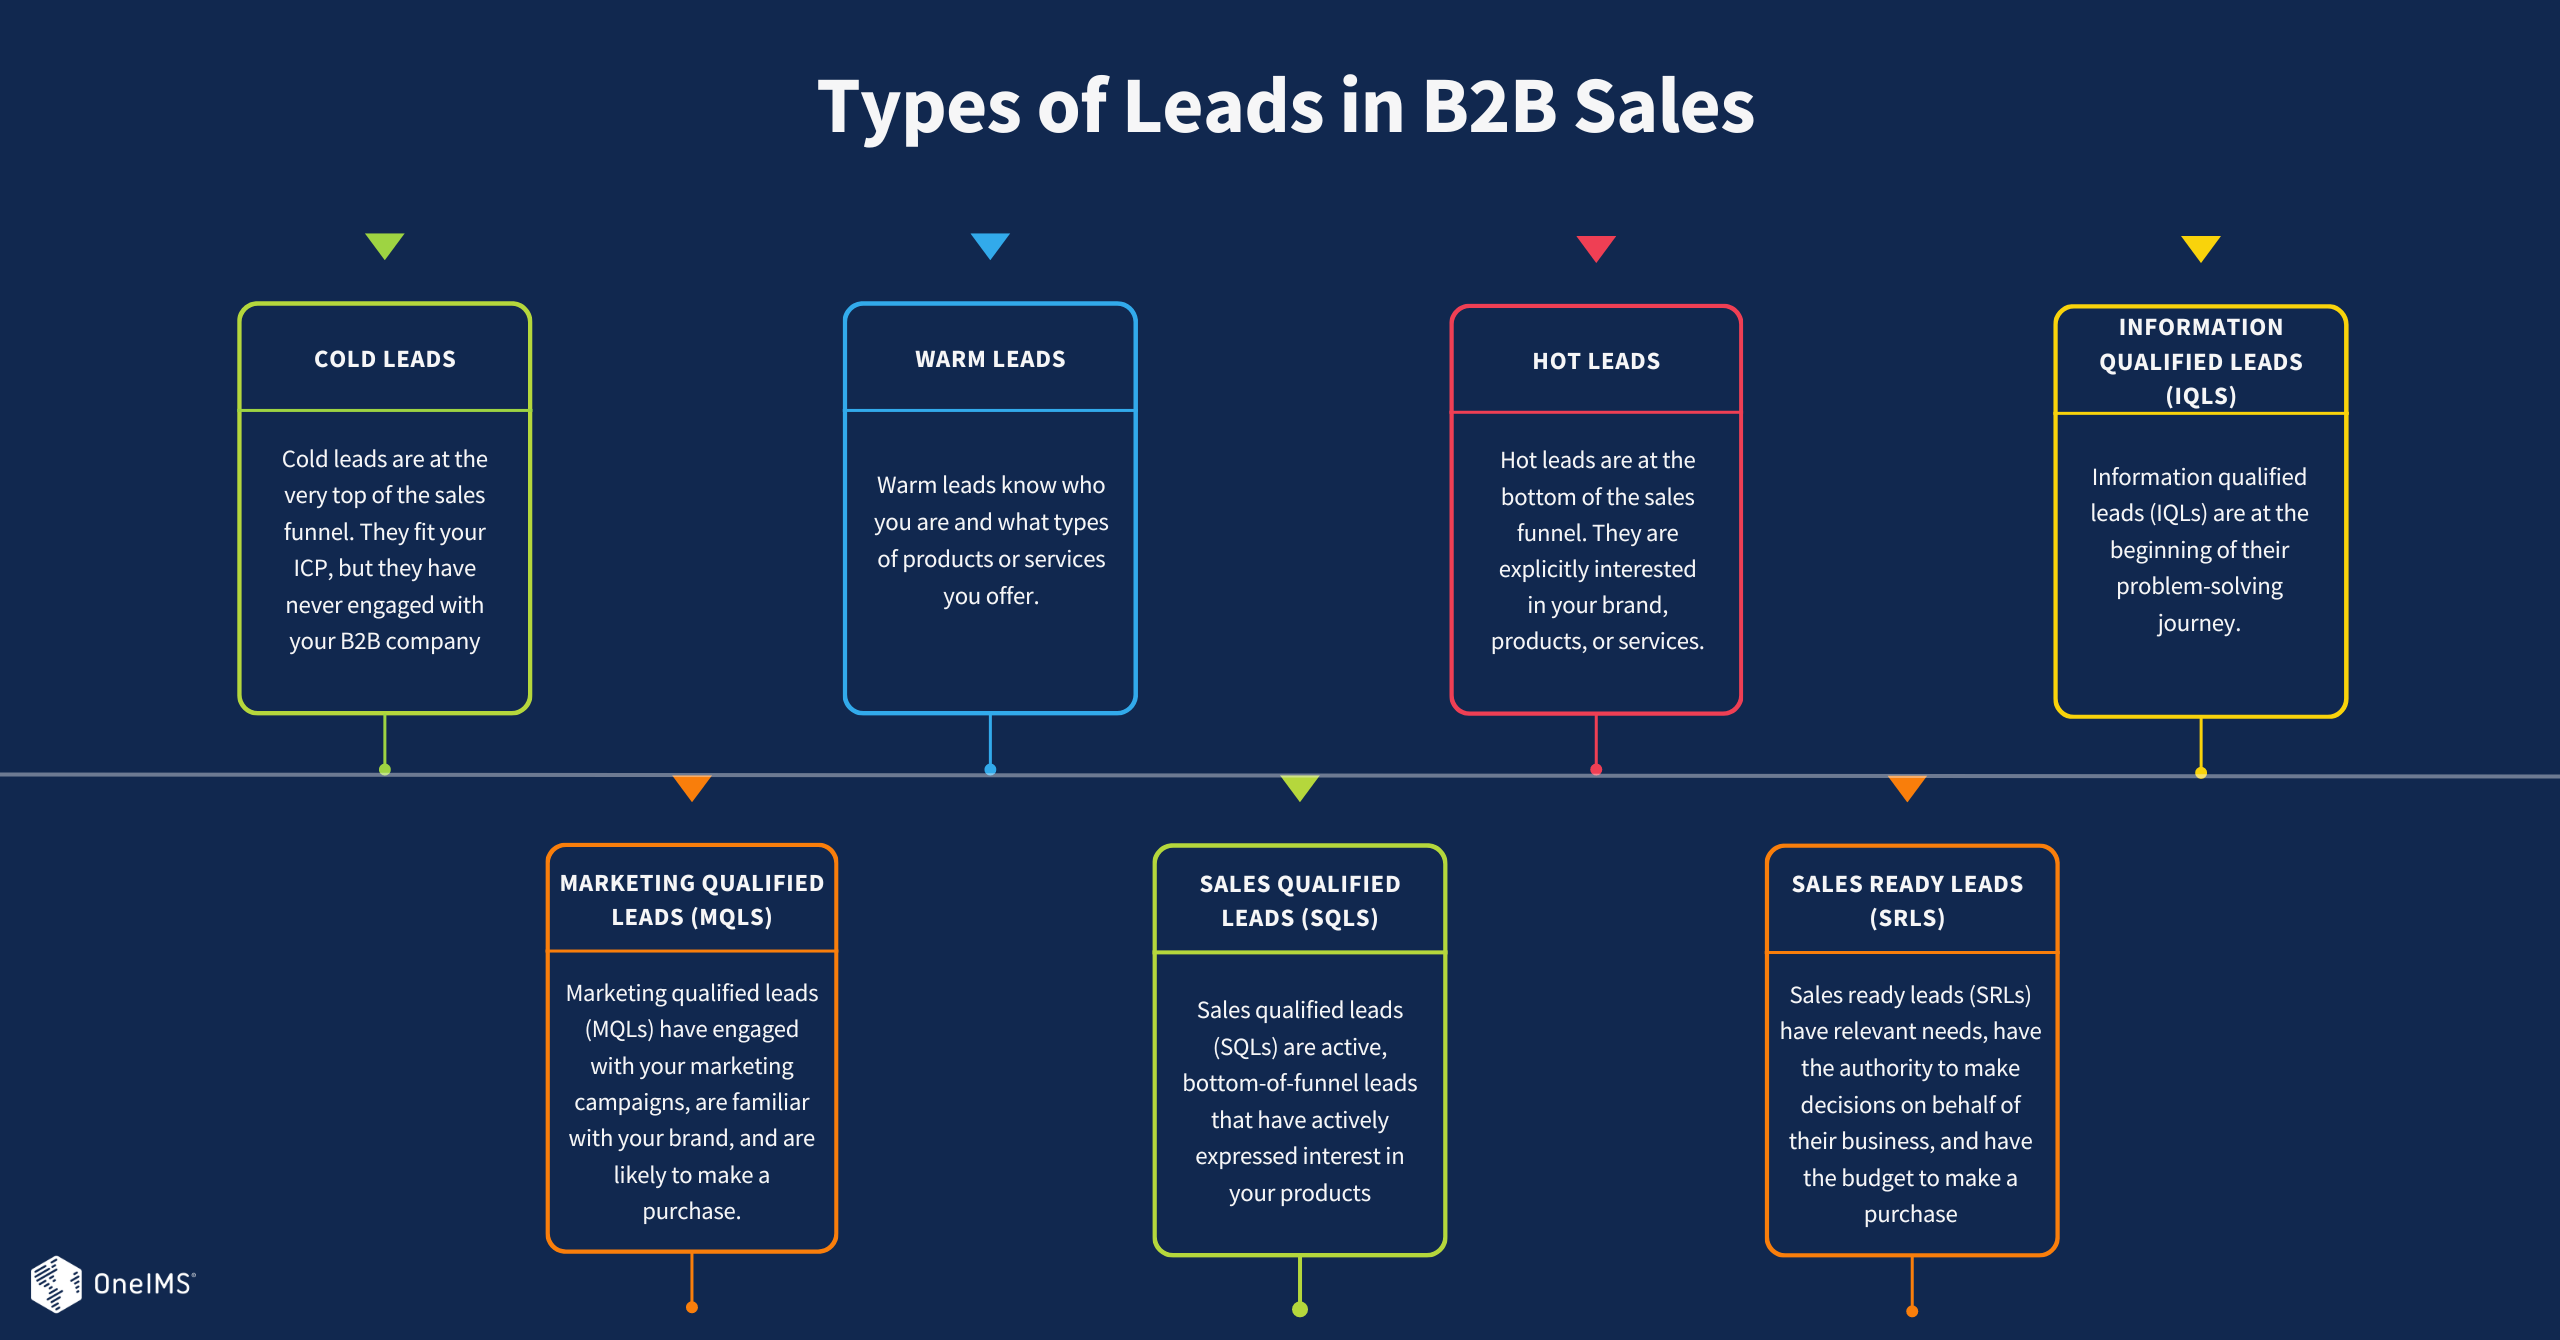 Types of Leads in B2B Sales